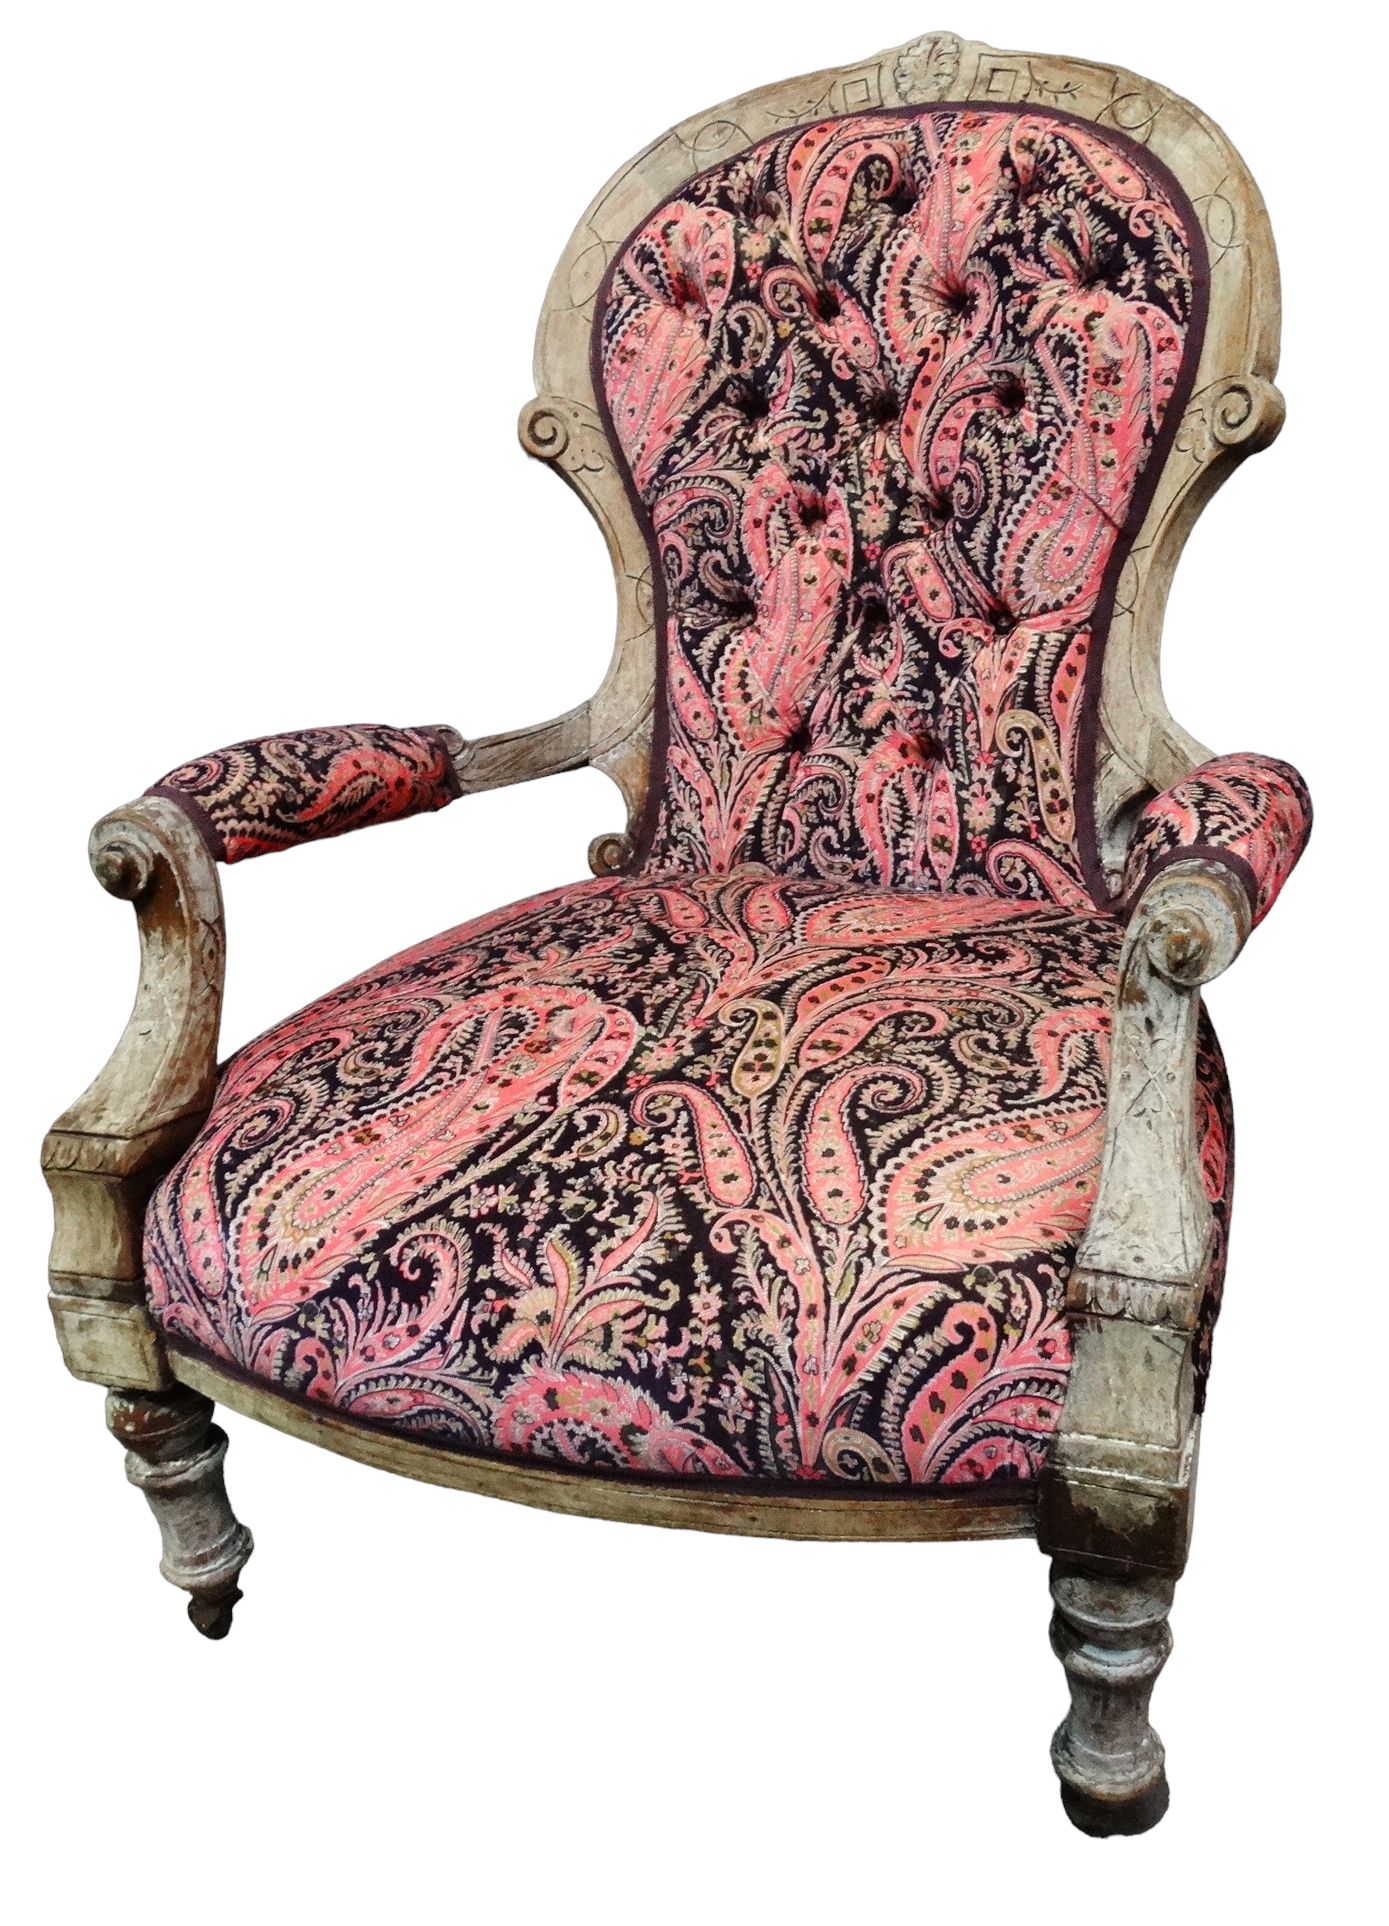 A late Victorian walnut framed spoon back button upholstered open armchair - covered in pink paisley